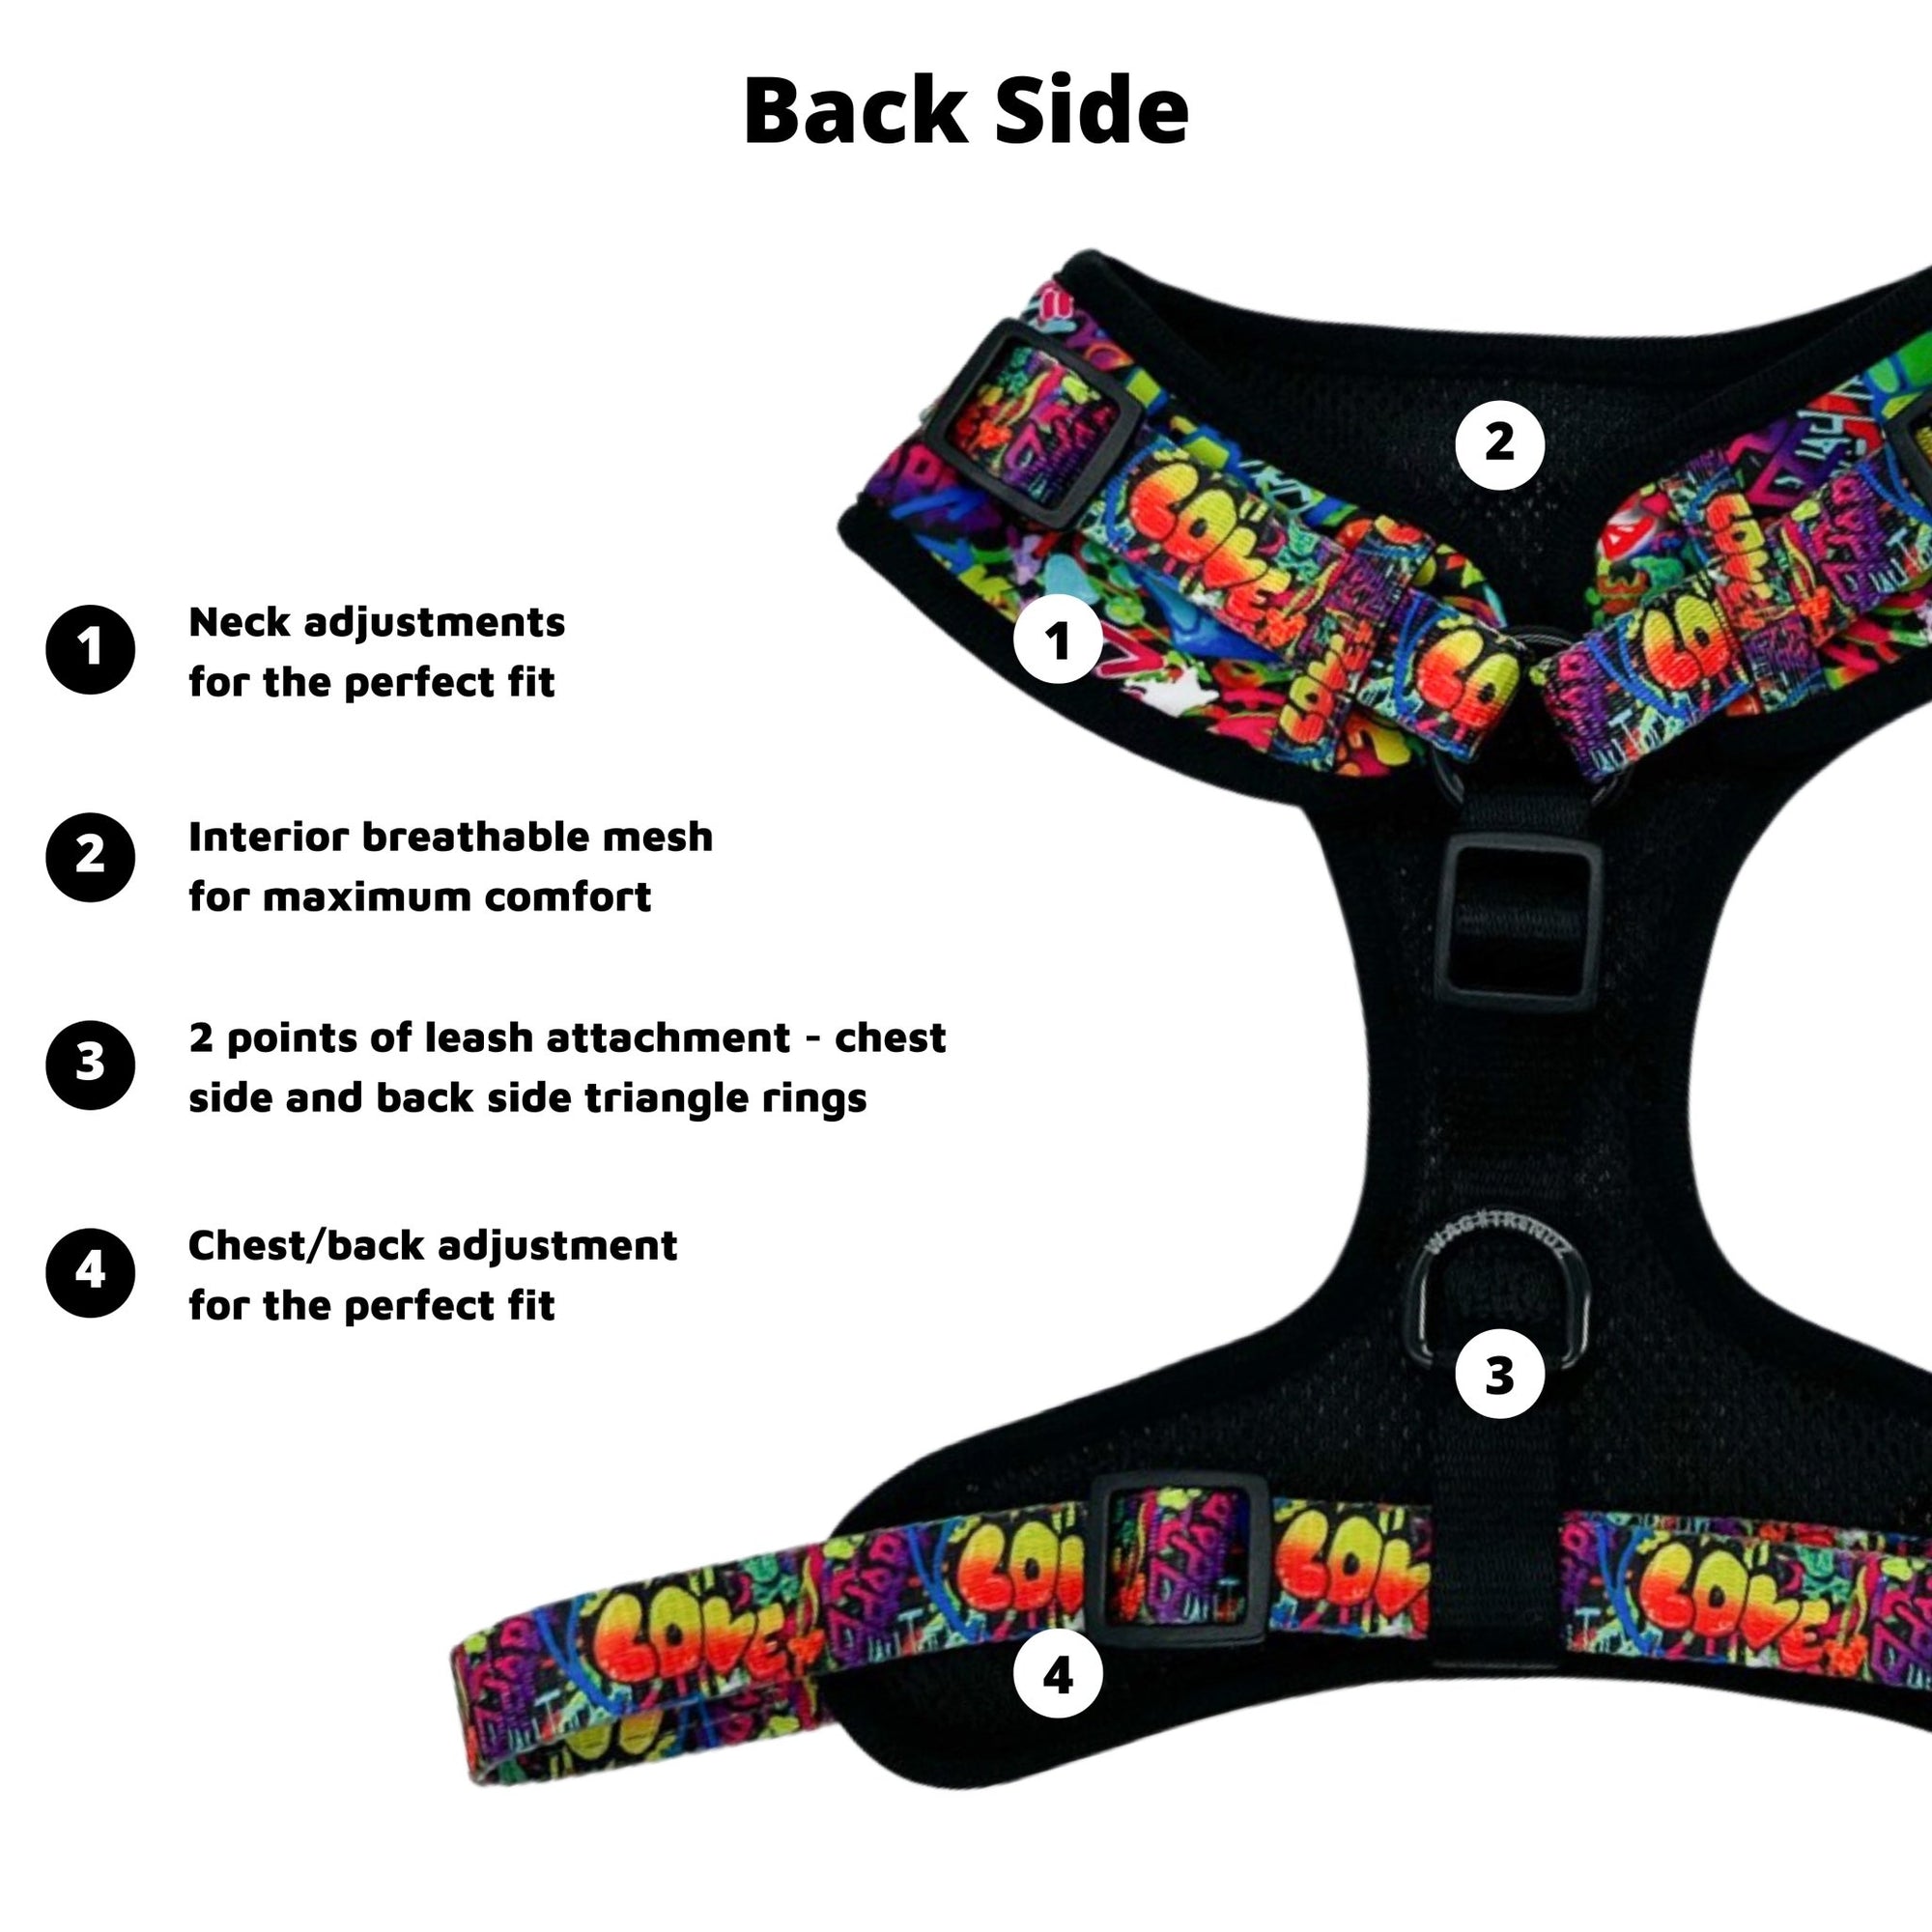 Dog Harness and Leash Set - Front Clip - multi-colored street graffiti on dog harness against solid white background - with product feature descriptions for backside of dog harness - Wag Trendz